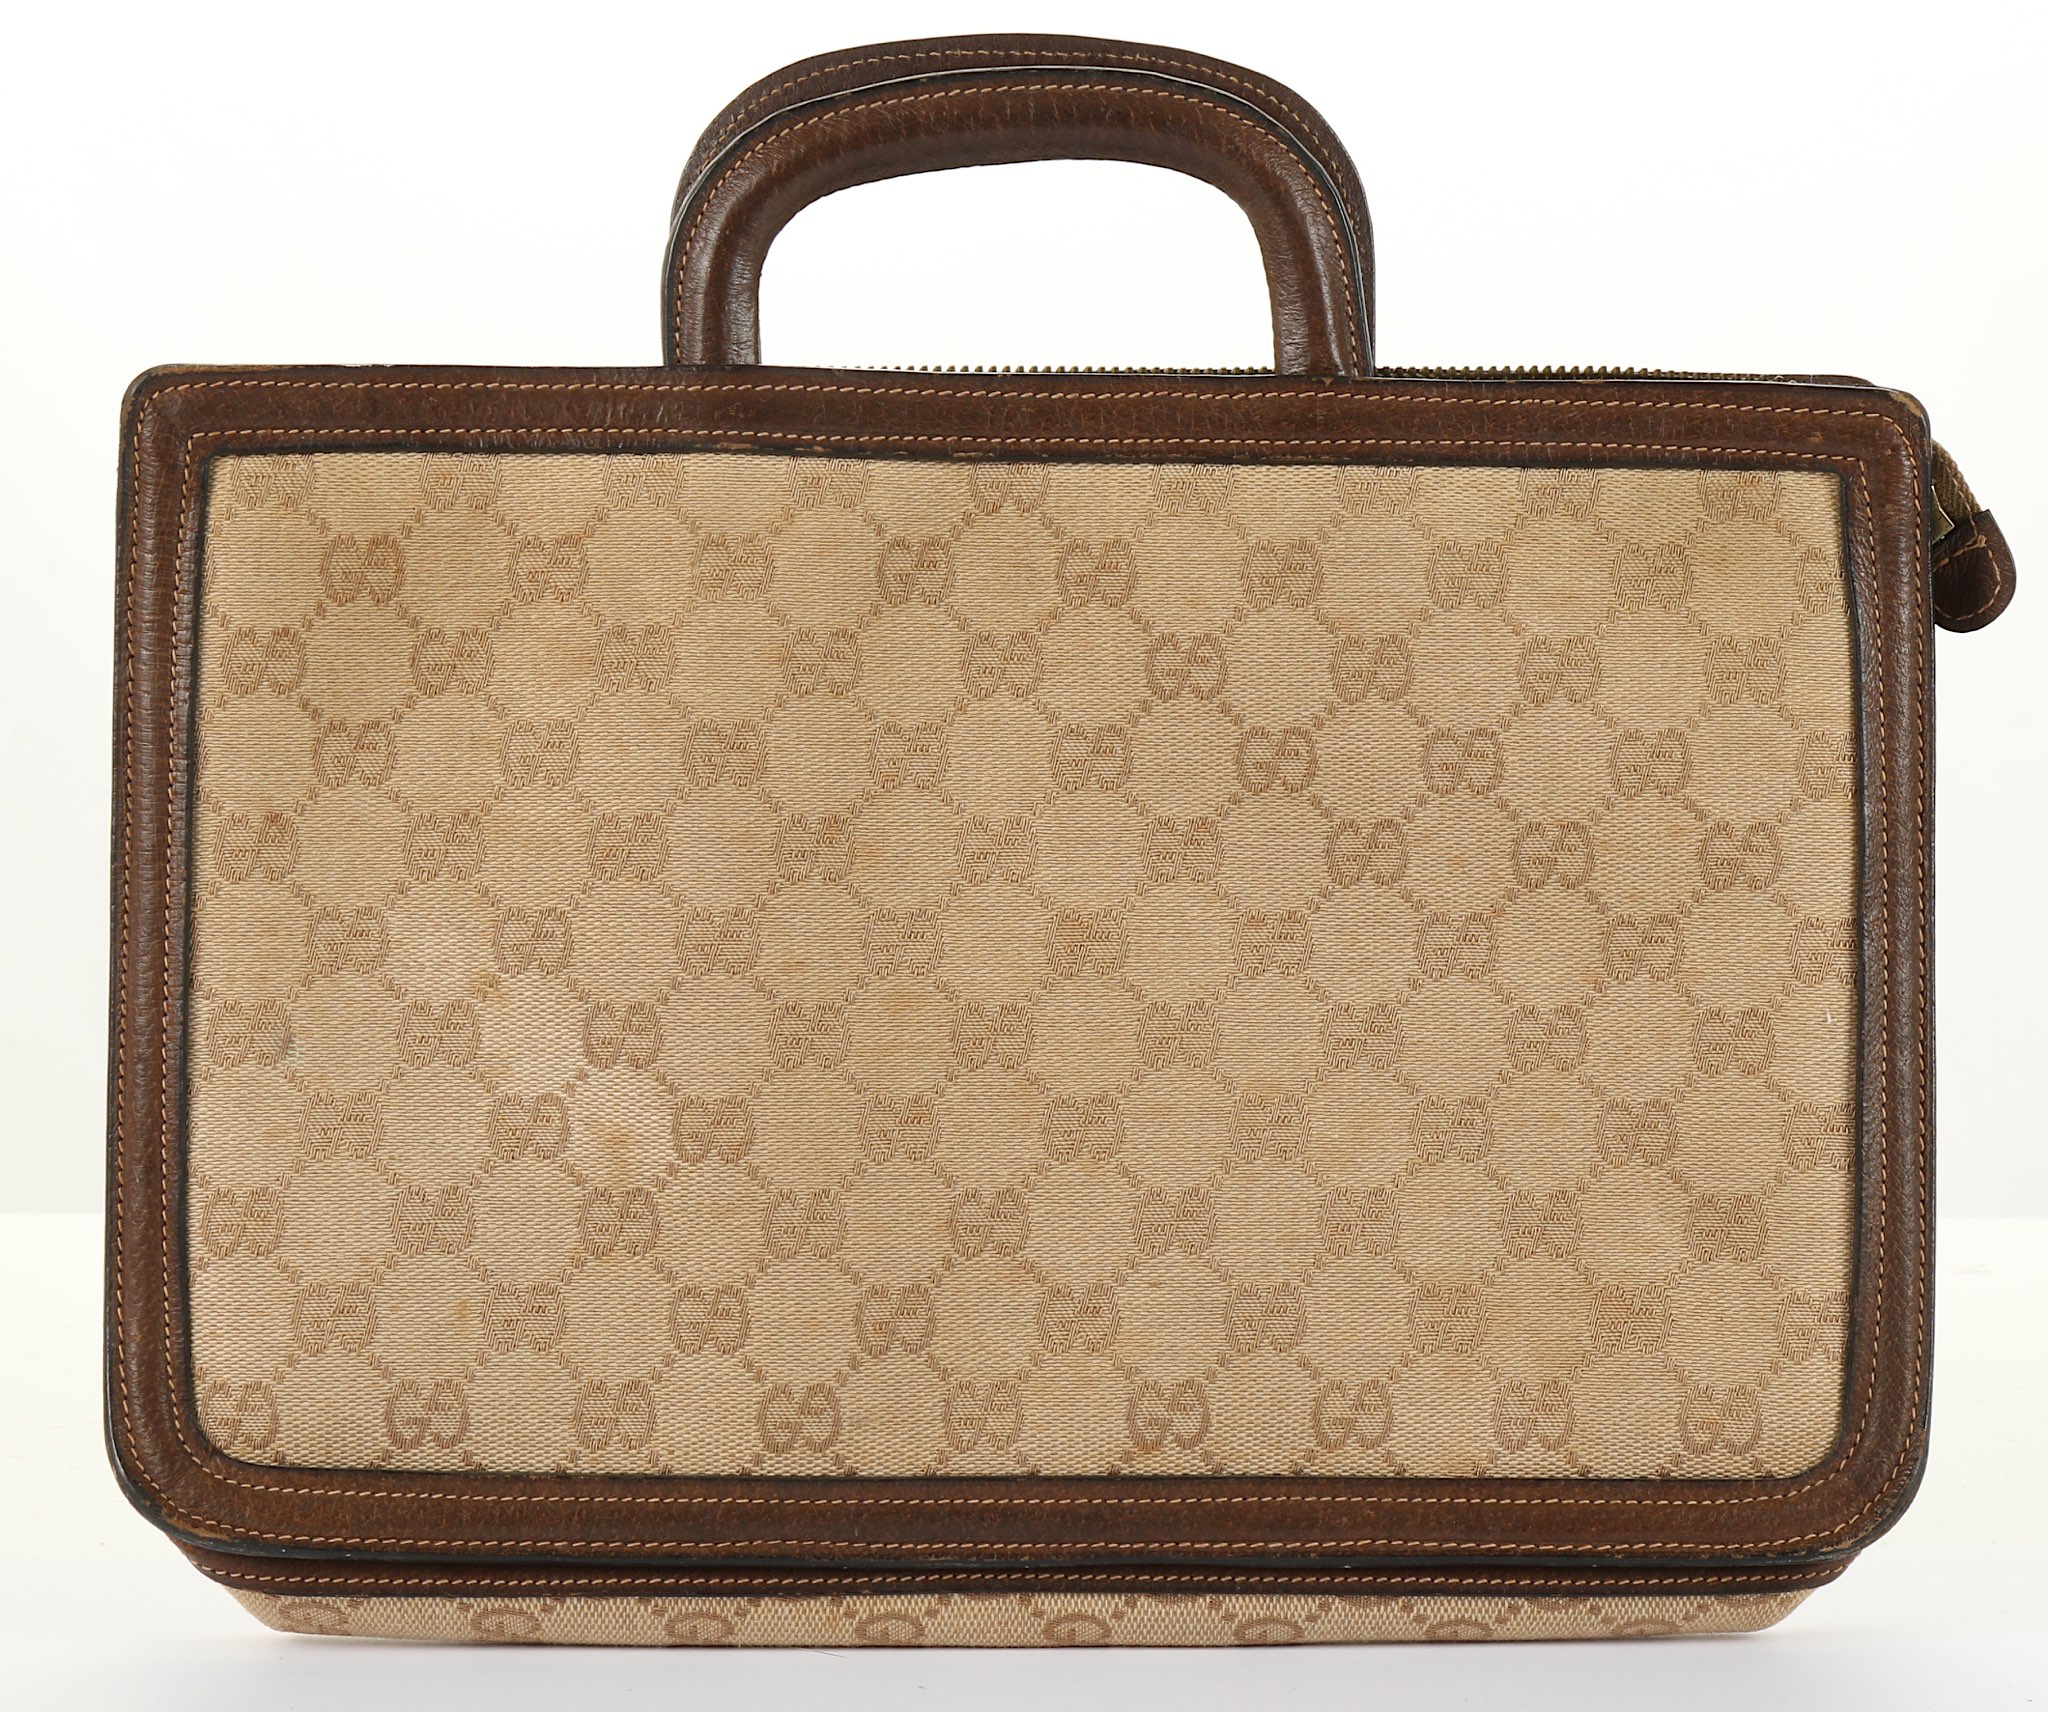 Gucci Document Holder, 1970s, brown monogram canva - Image 4 of 4